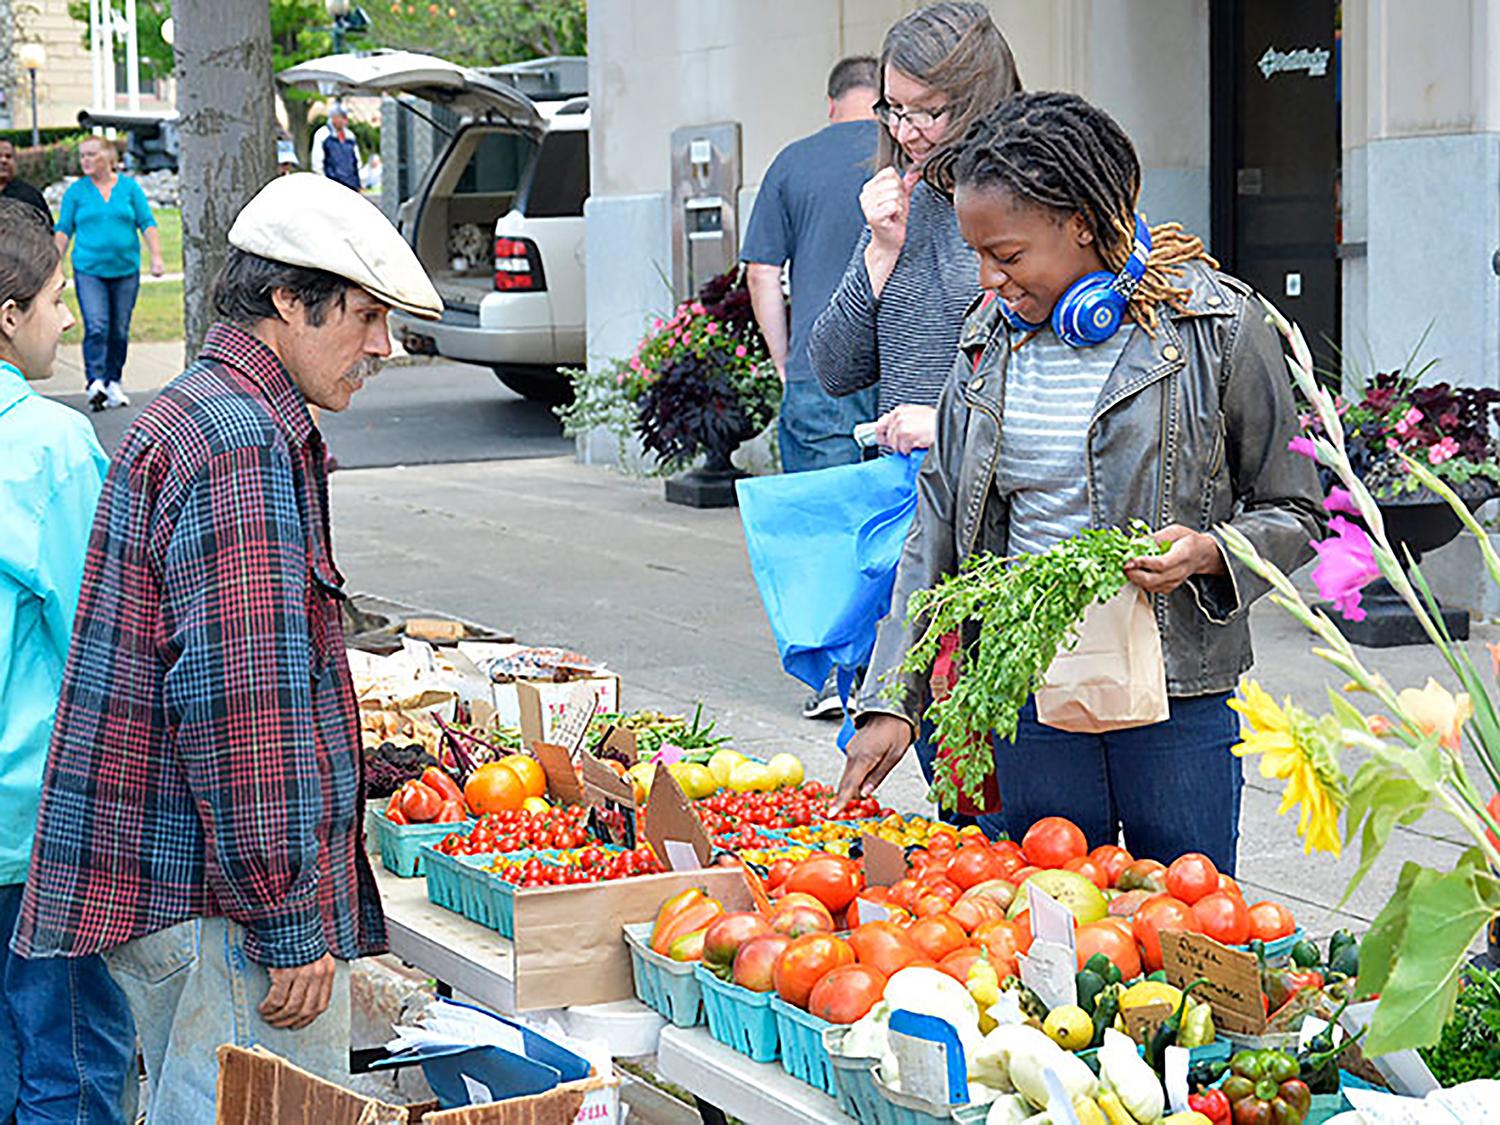 Student buys fresh goods at Farmers Market